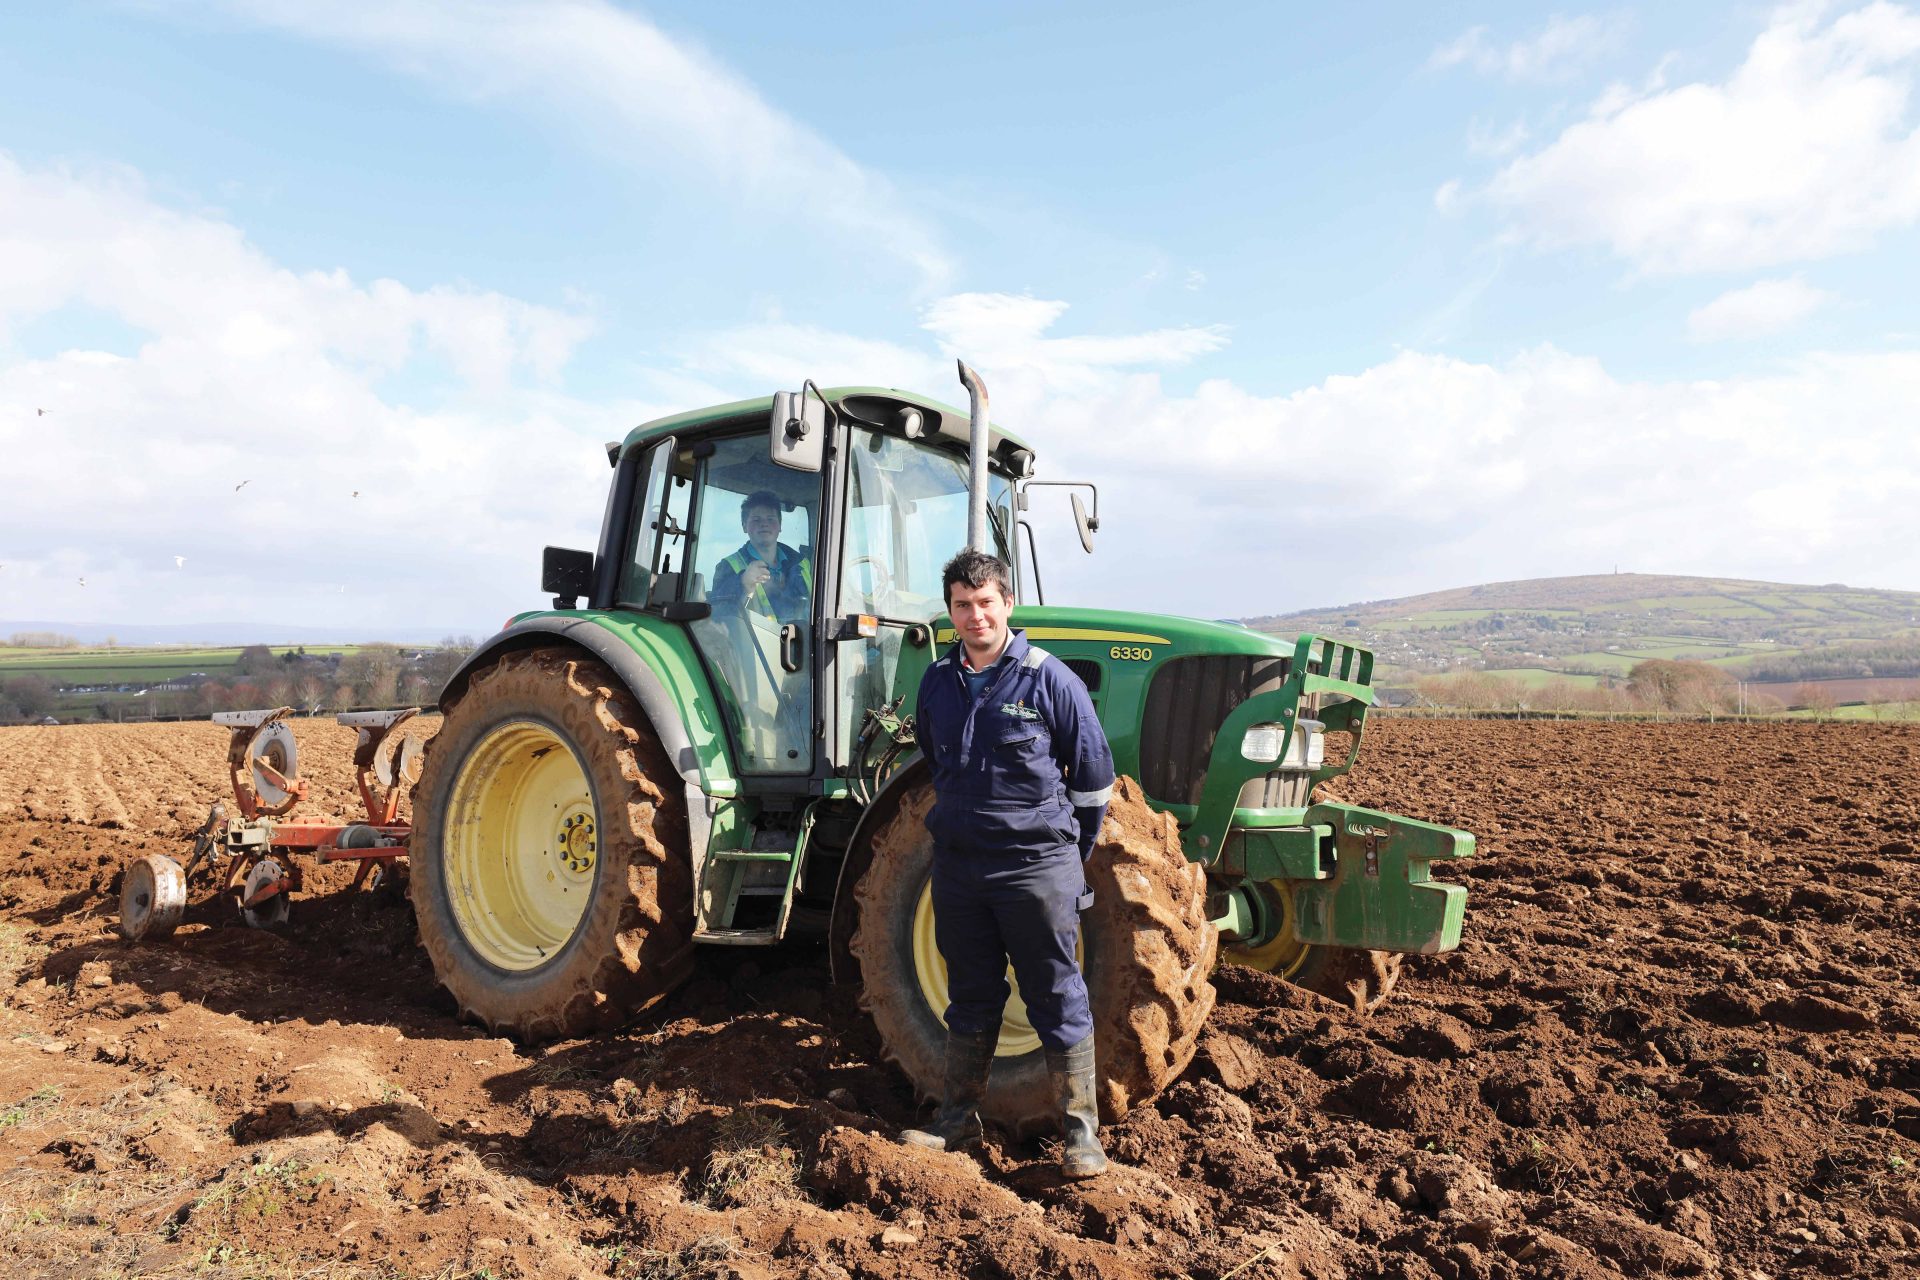 Student standing in front of a tractor in a ploughed field.